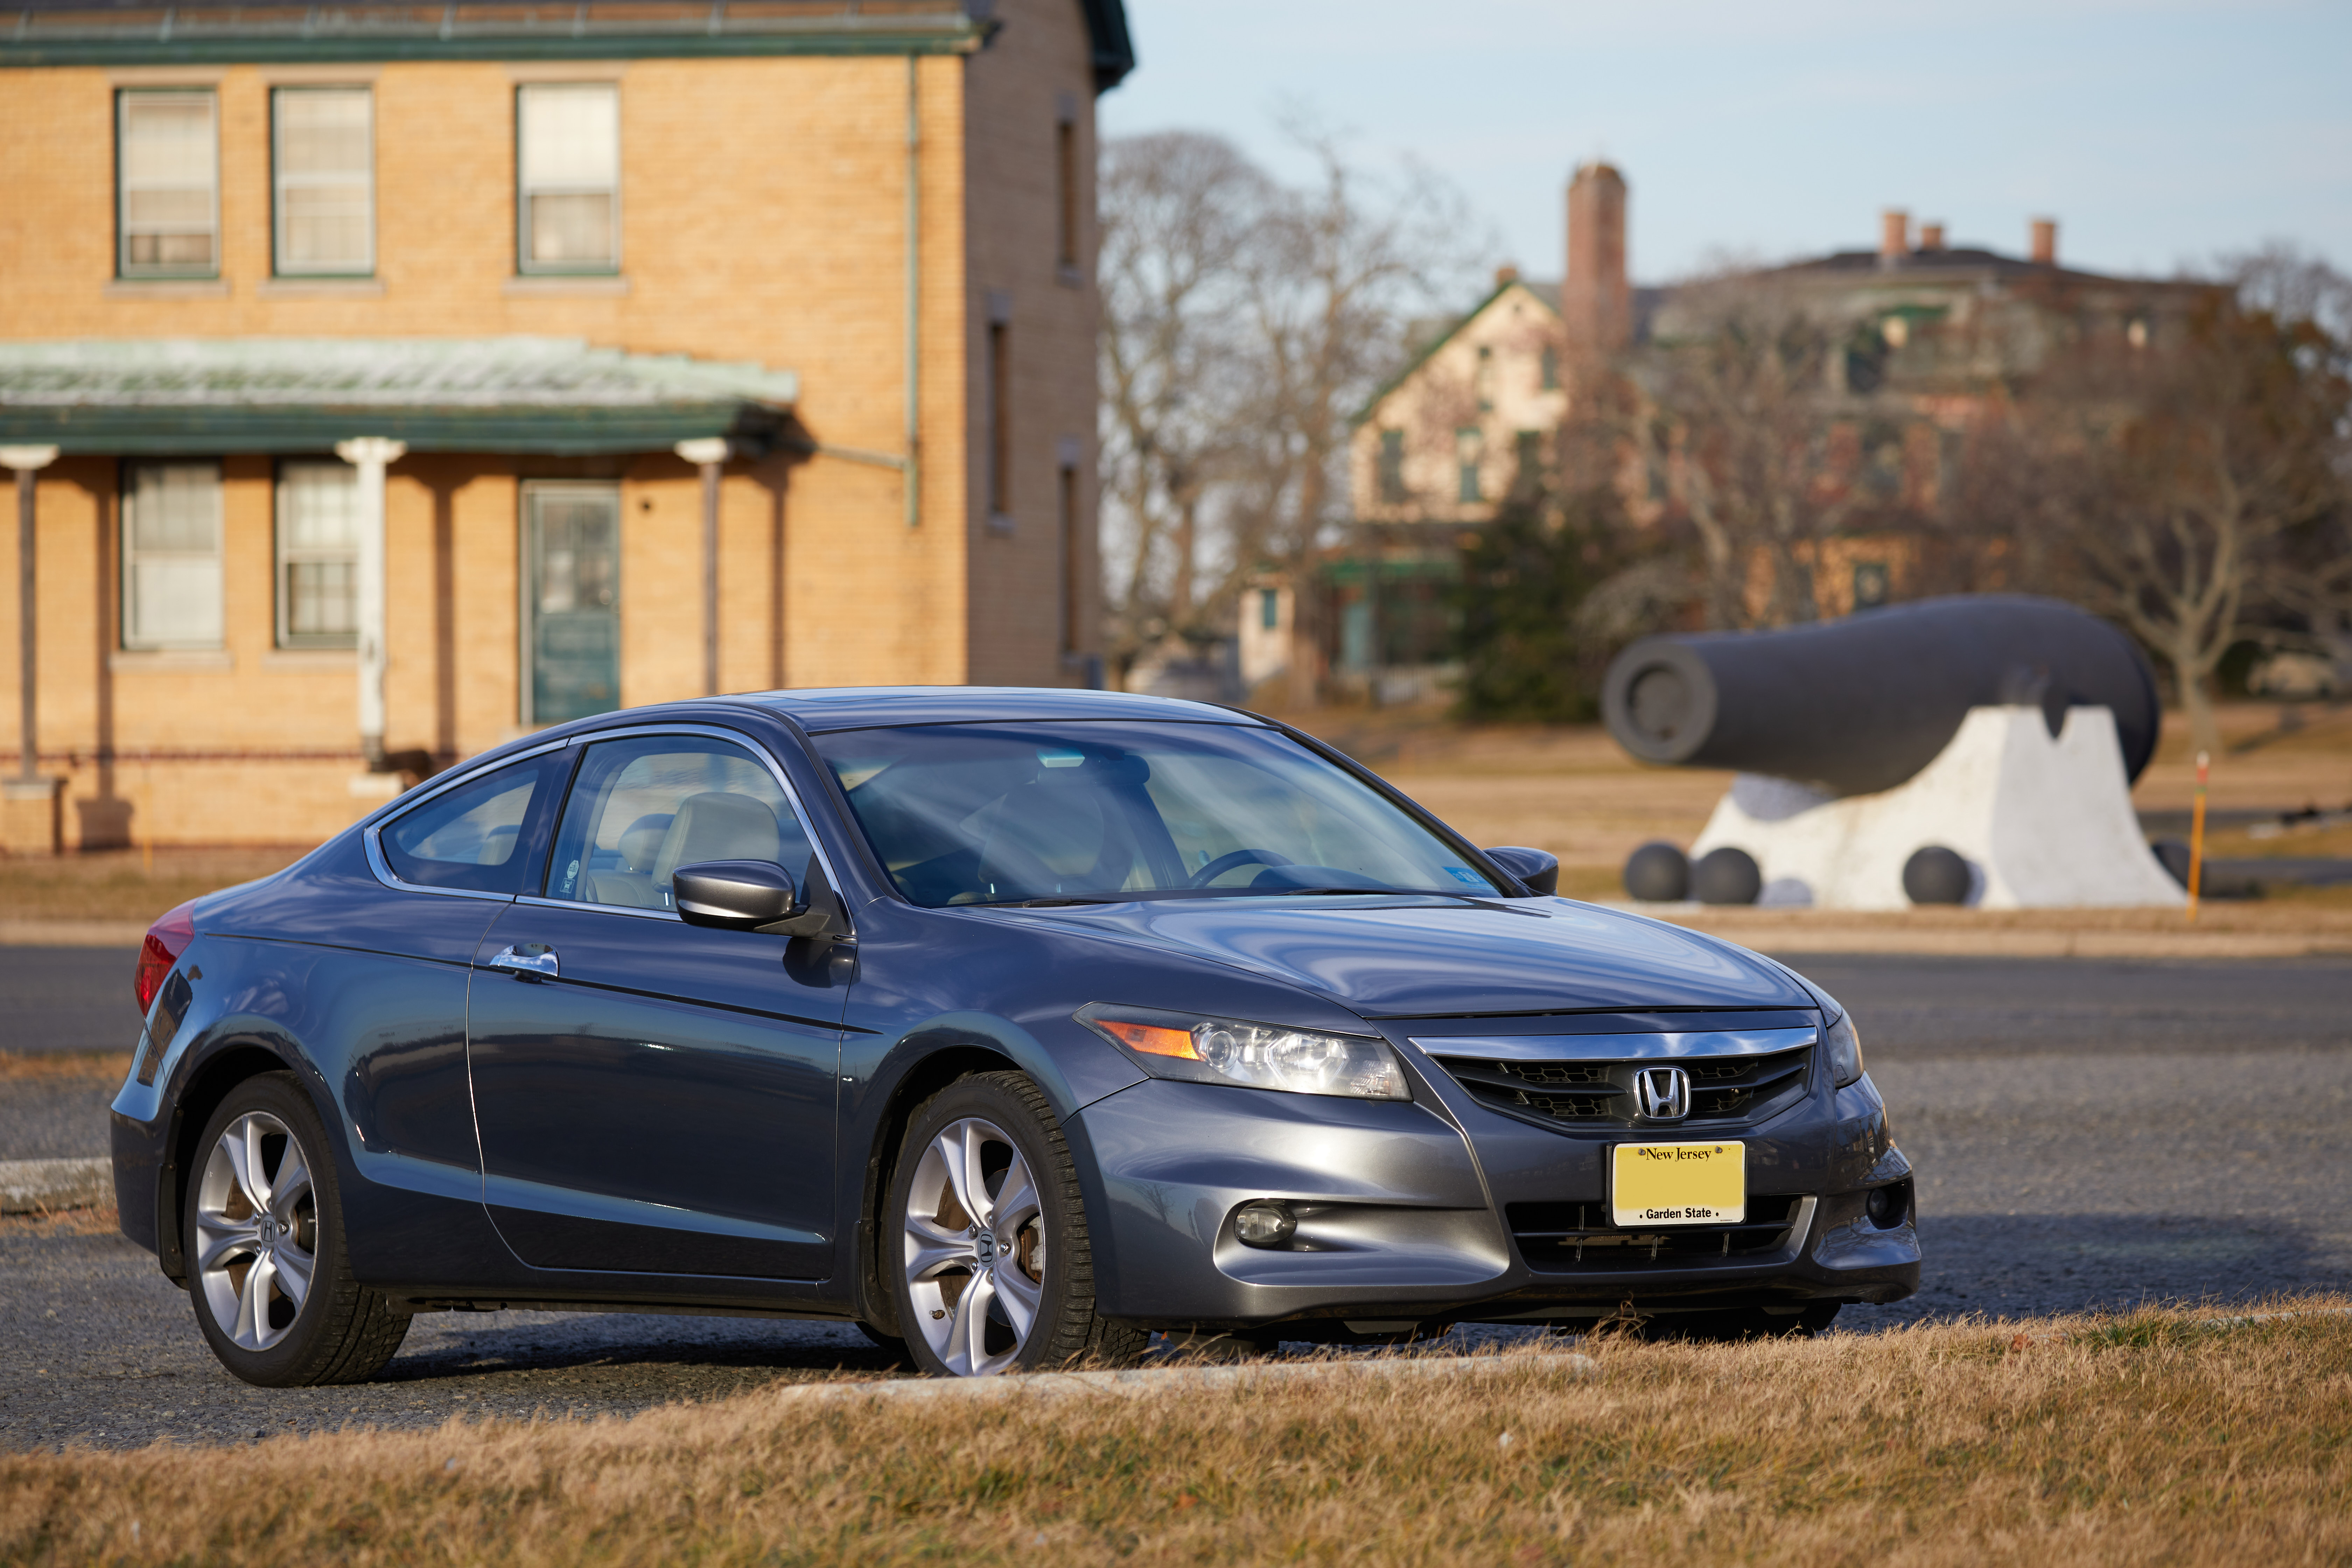 2012 Honda Accord parked in Fort Hancock.